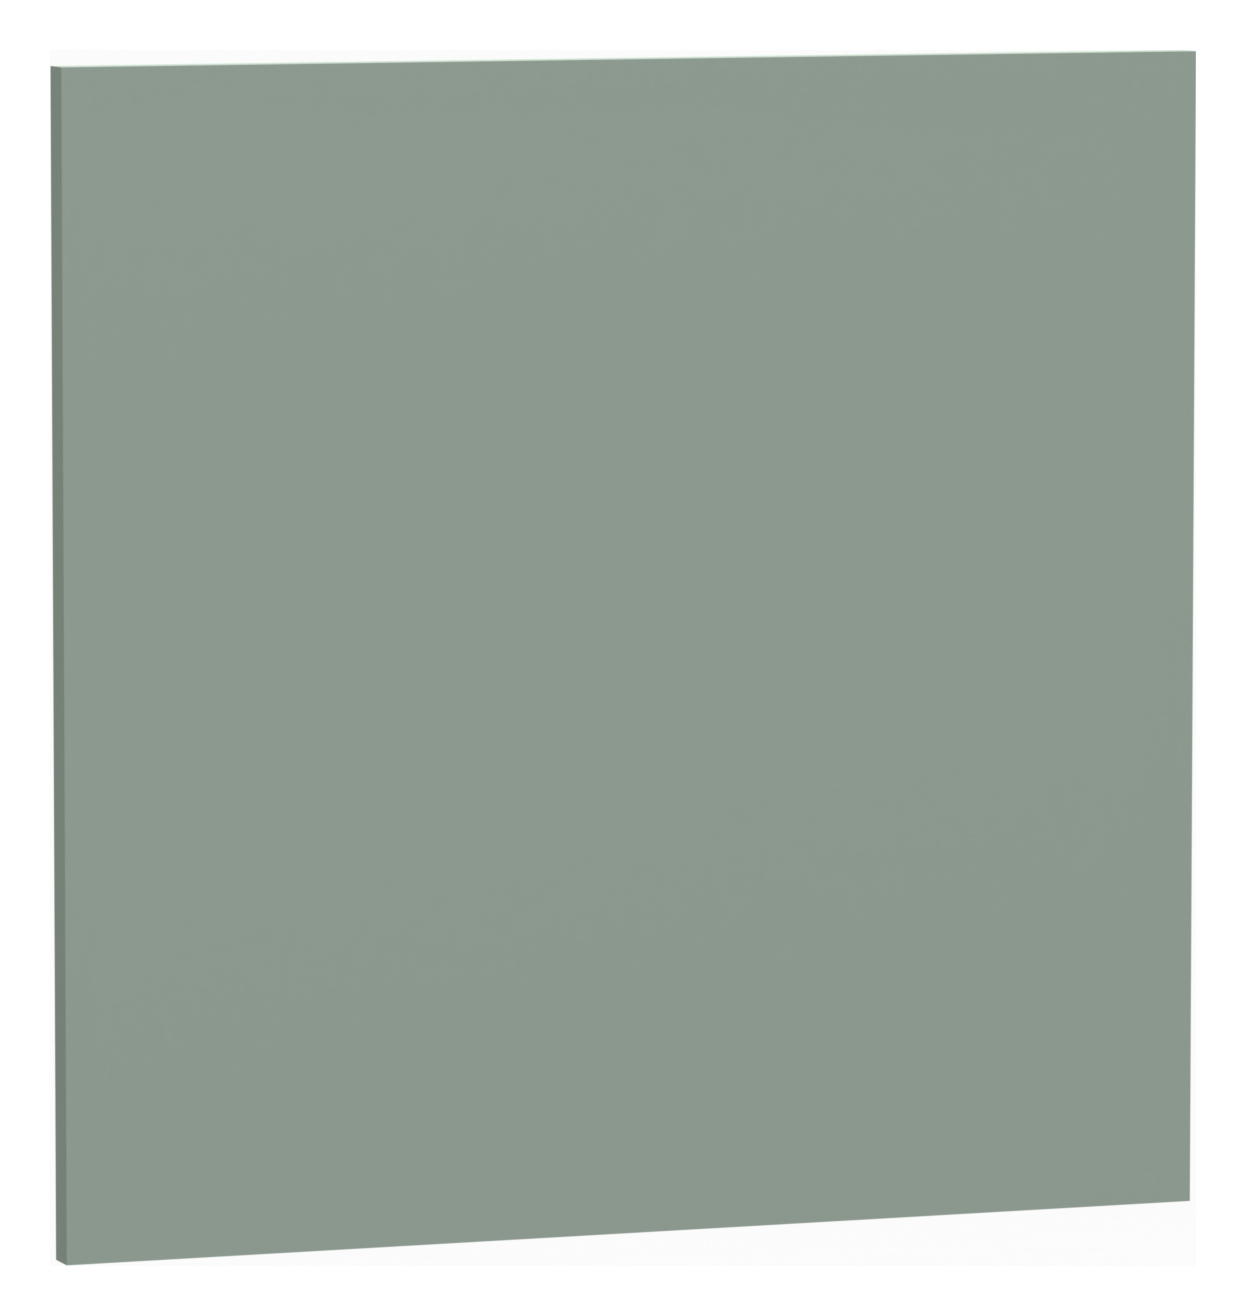 Image of Wickes Orlando Reed Green Appliance Fascia - 600 x 584mm